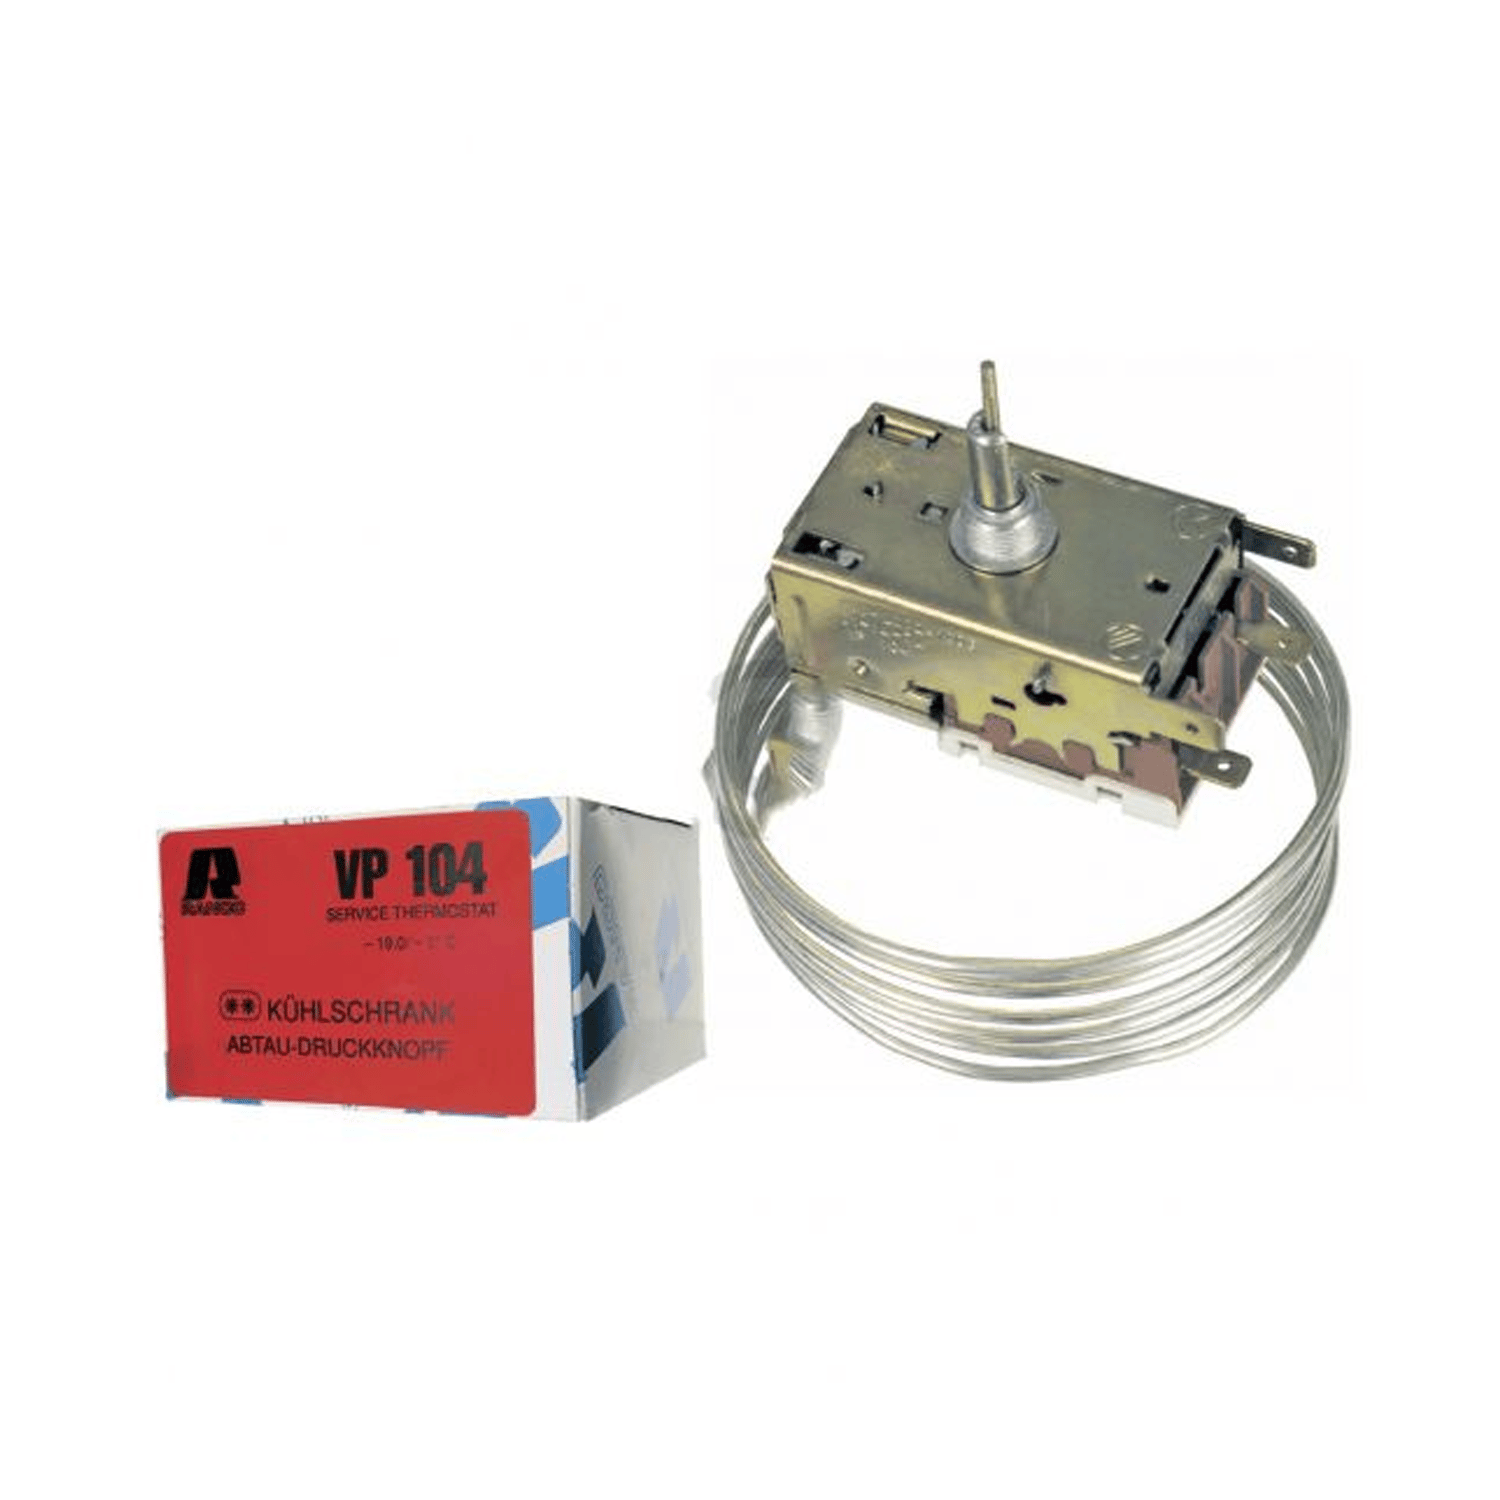 Service thermostat Ranco VP104 K60-L2024 for refrigerator ROBERTSHAW min -9 ° C, max -19 ° C, switching value -11 ° C, L 1600 mm, 6.3mm AMP